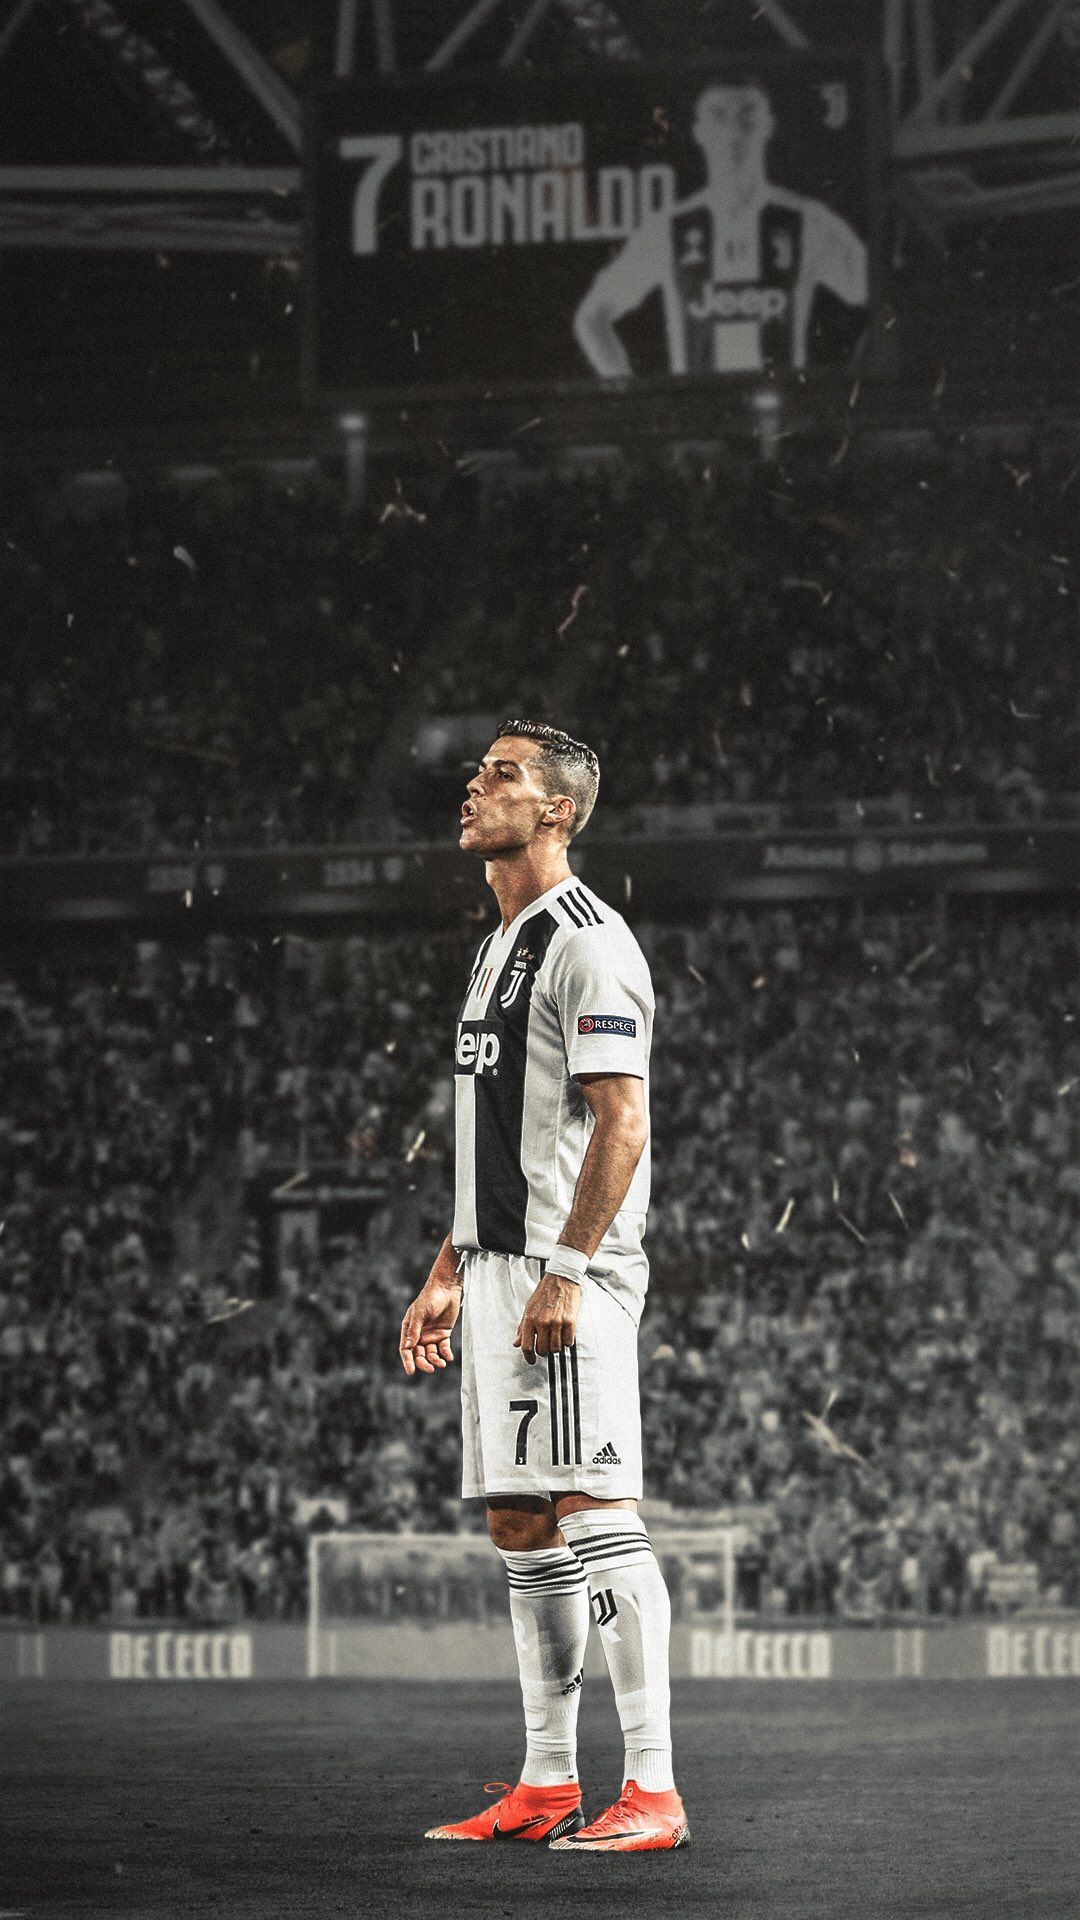 Cristiano Ronaldo Wallpaper iPhone with high-resolution 1080x1920 pixel. You can use this wallpaper for your iPhone 5, 6, 7, 8, X, XS, XR backgrounds, Mobile Screensaver, or iPad Lock Screen - Cristiano Ronaldo